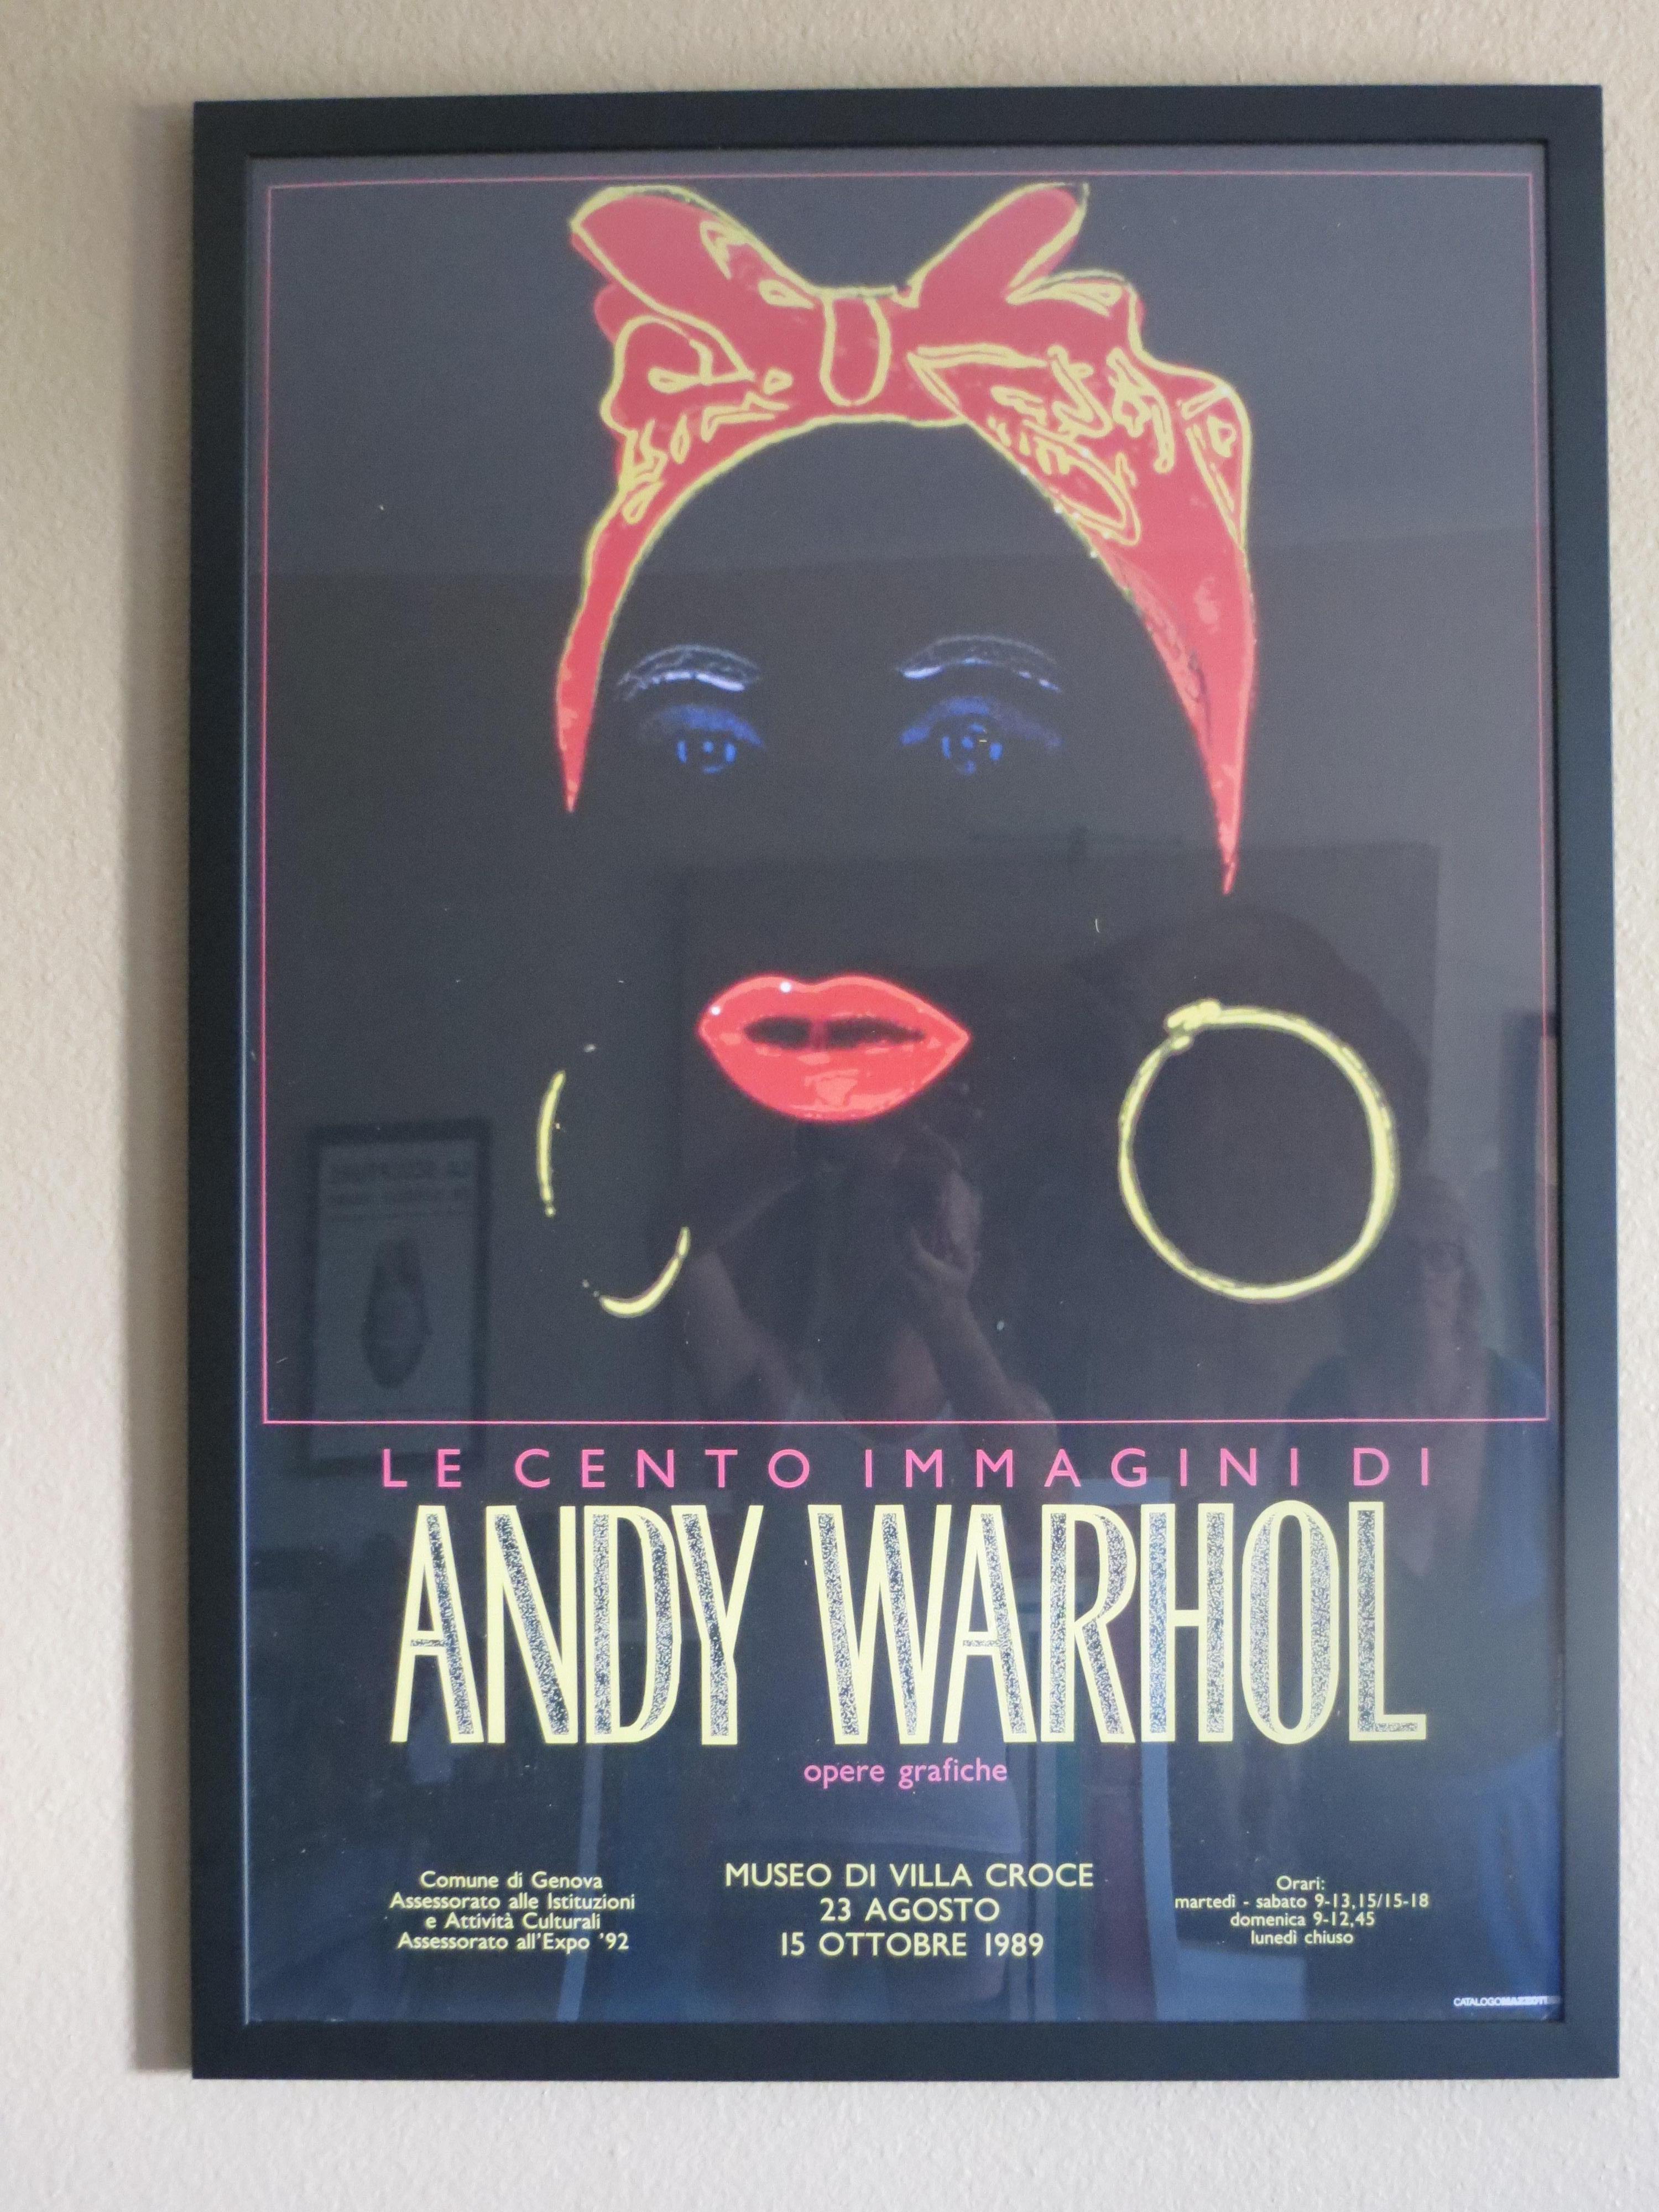 Exhibition Poster after Andy Warhol, Genova 1989